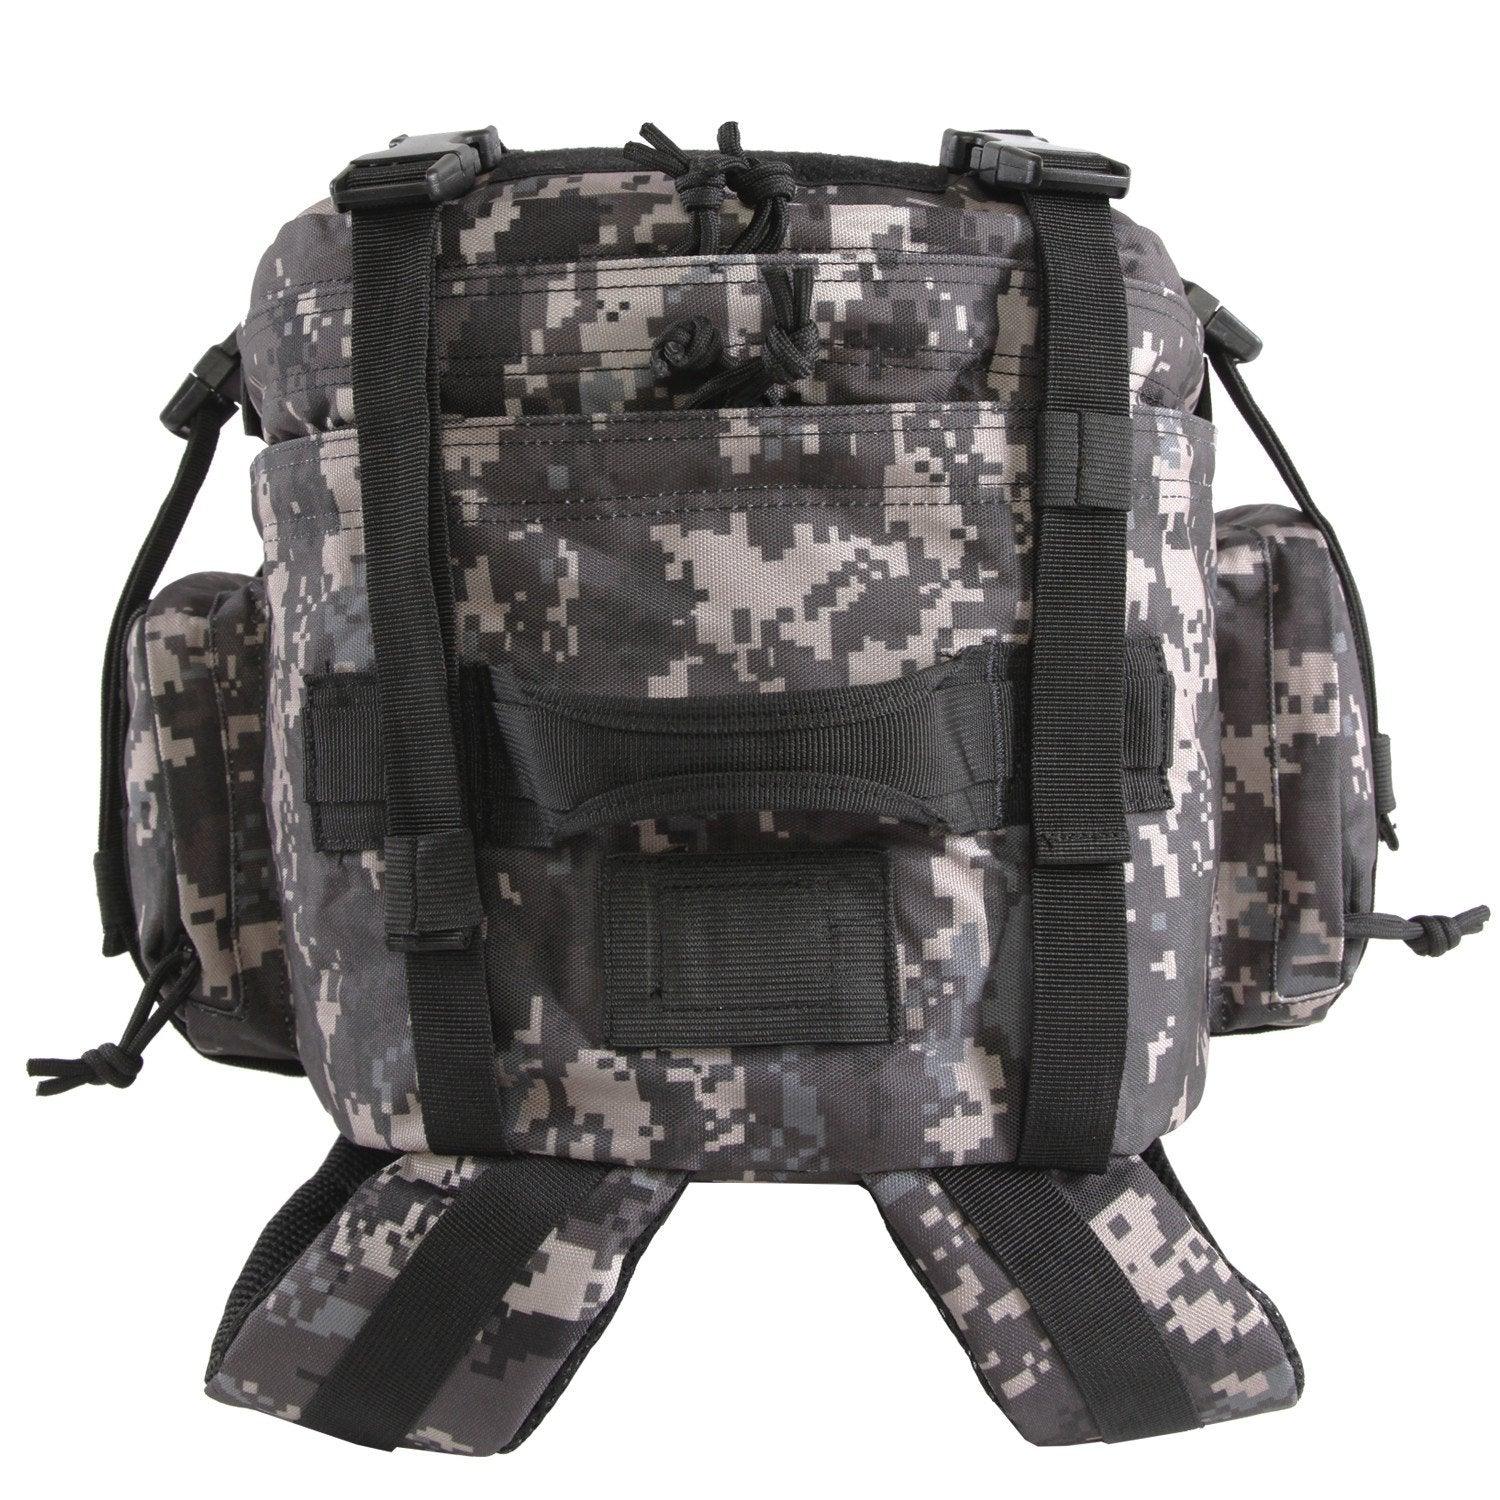 Backlash 3 Day Tactical Backpack | MOLLE GEAR | Law Enforcement